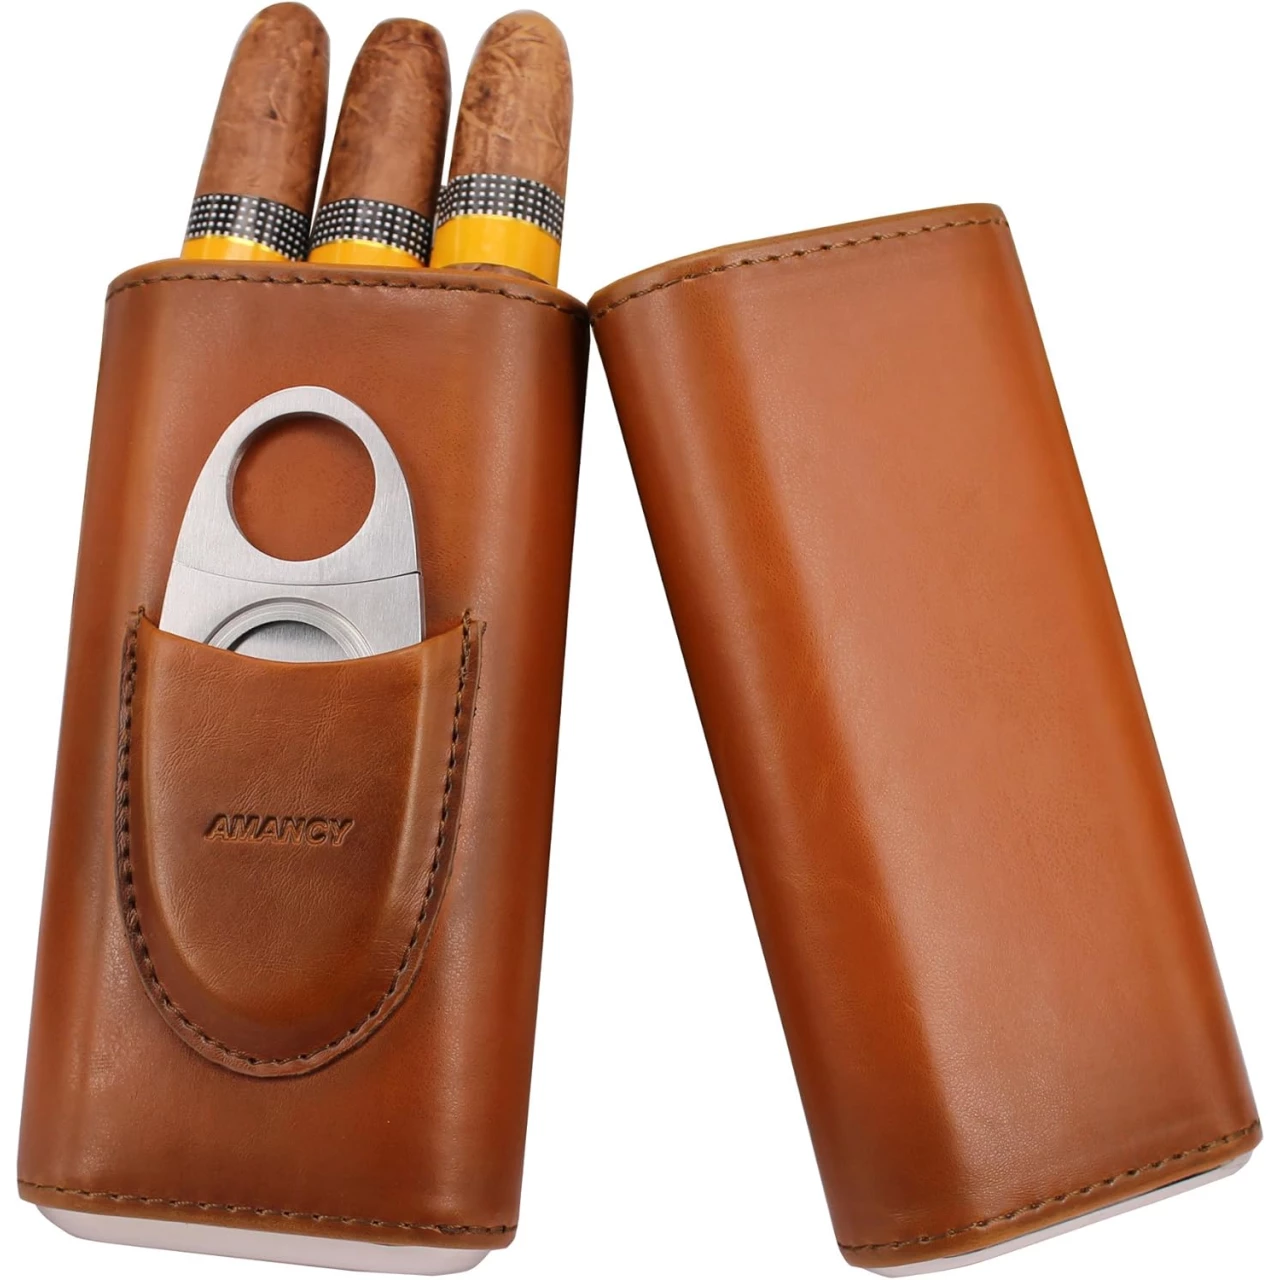 AMANCY Premium 3- Finger Brown Leather Cigar Case, Cedar Wood Lined Cigar Humidor with Silver Stainless Steel Cutter